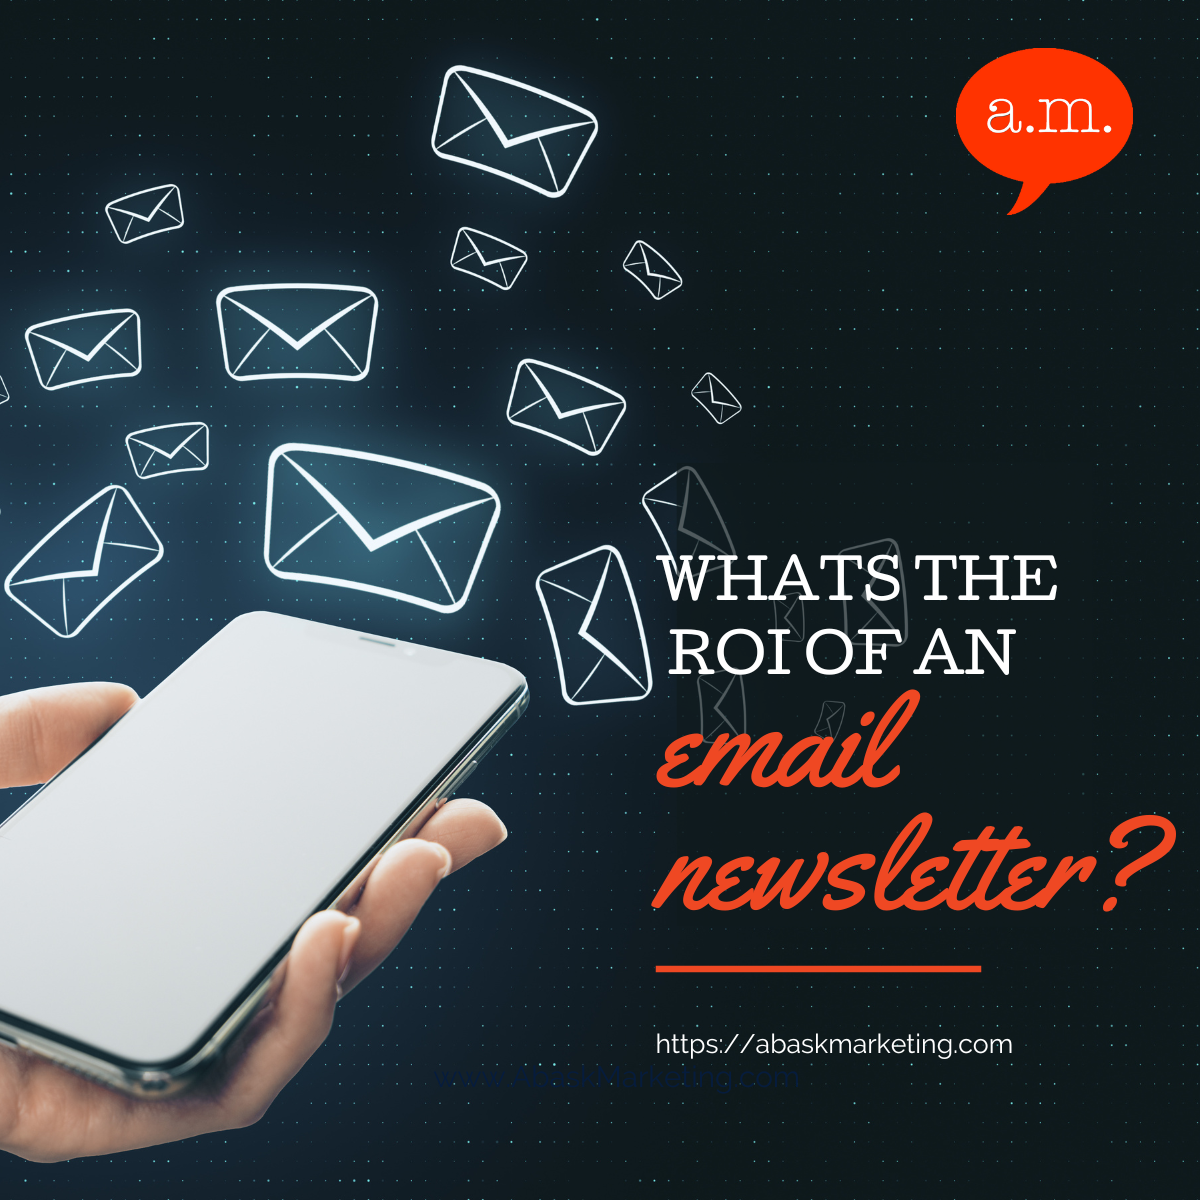 What Is The ROI Of An Email Newsletter?